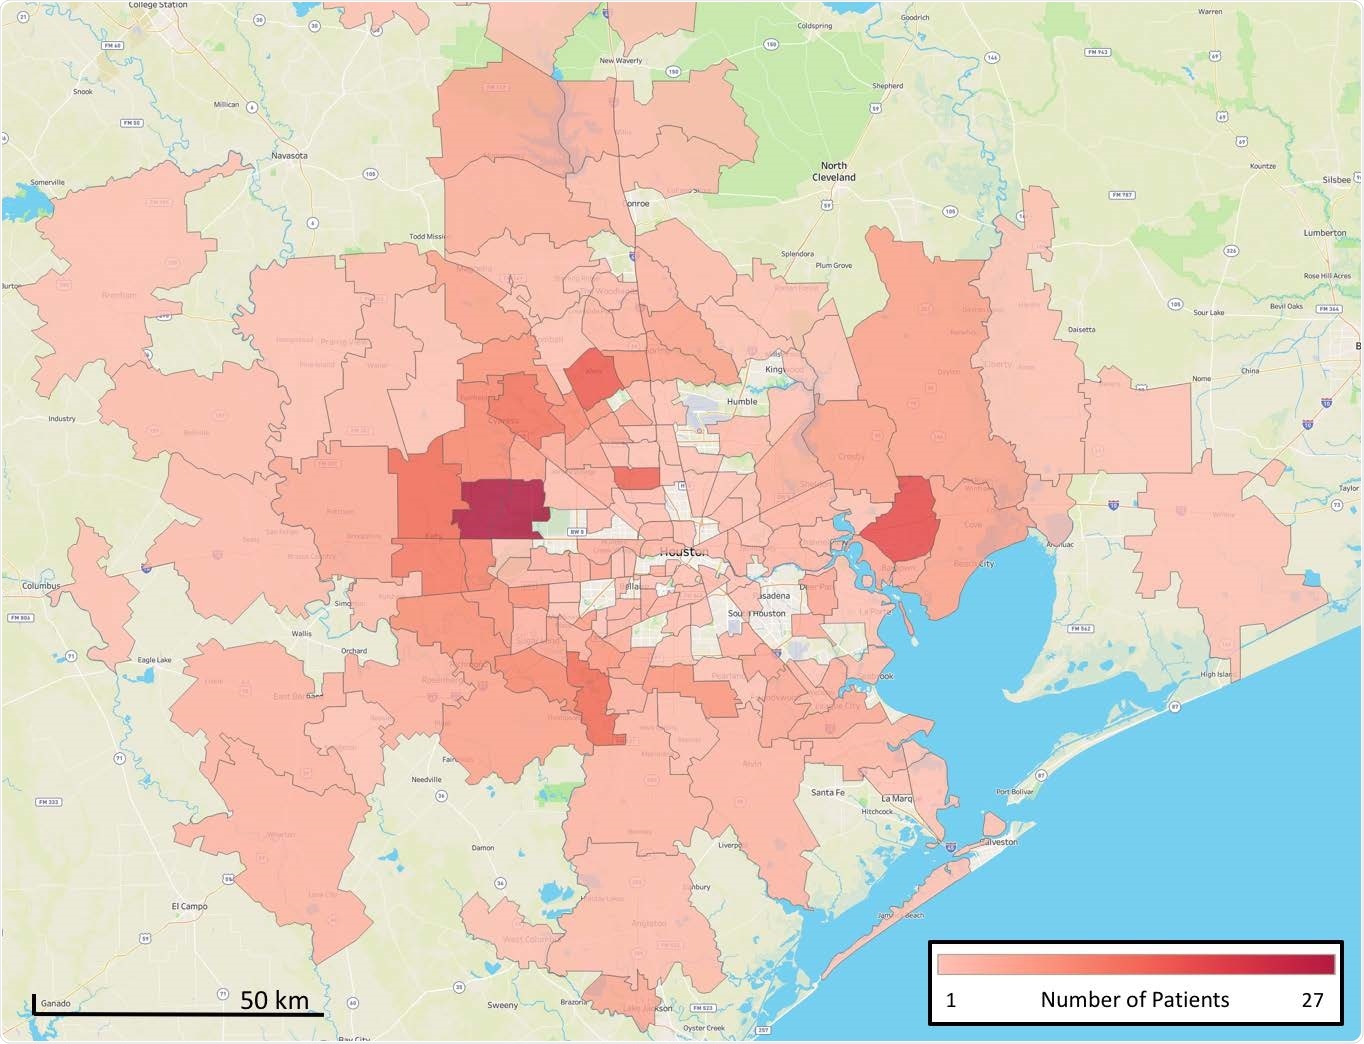 Geospatial distribution of B.1.1.7 cases identified in the study. The home address zip code for each patient was used and figures were generated using Tableau version 2020.3.4.